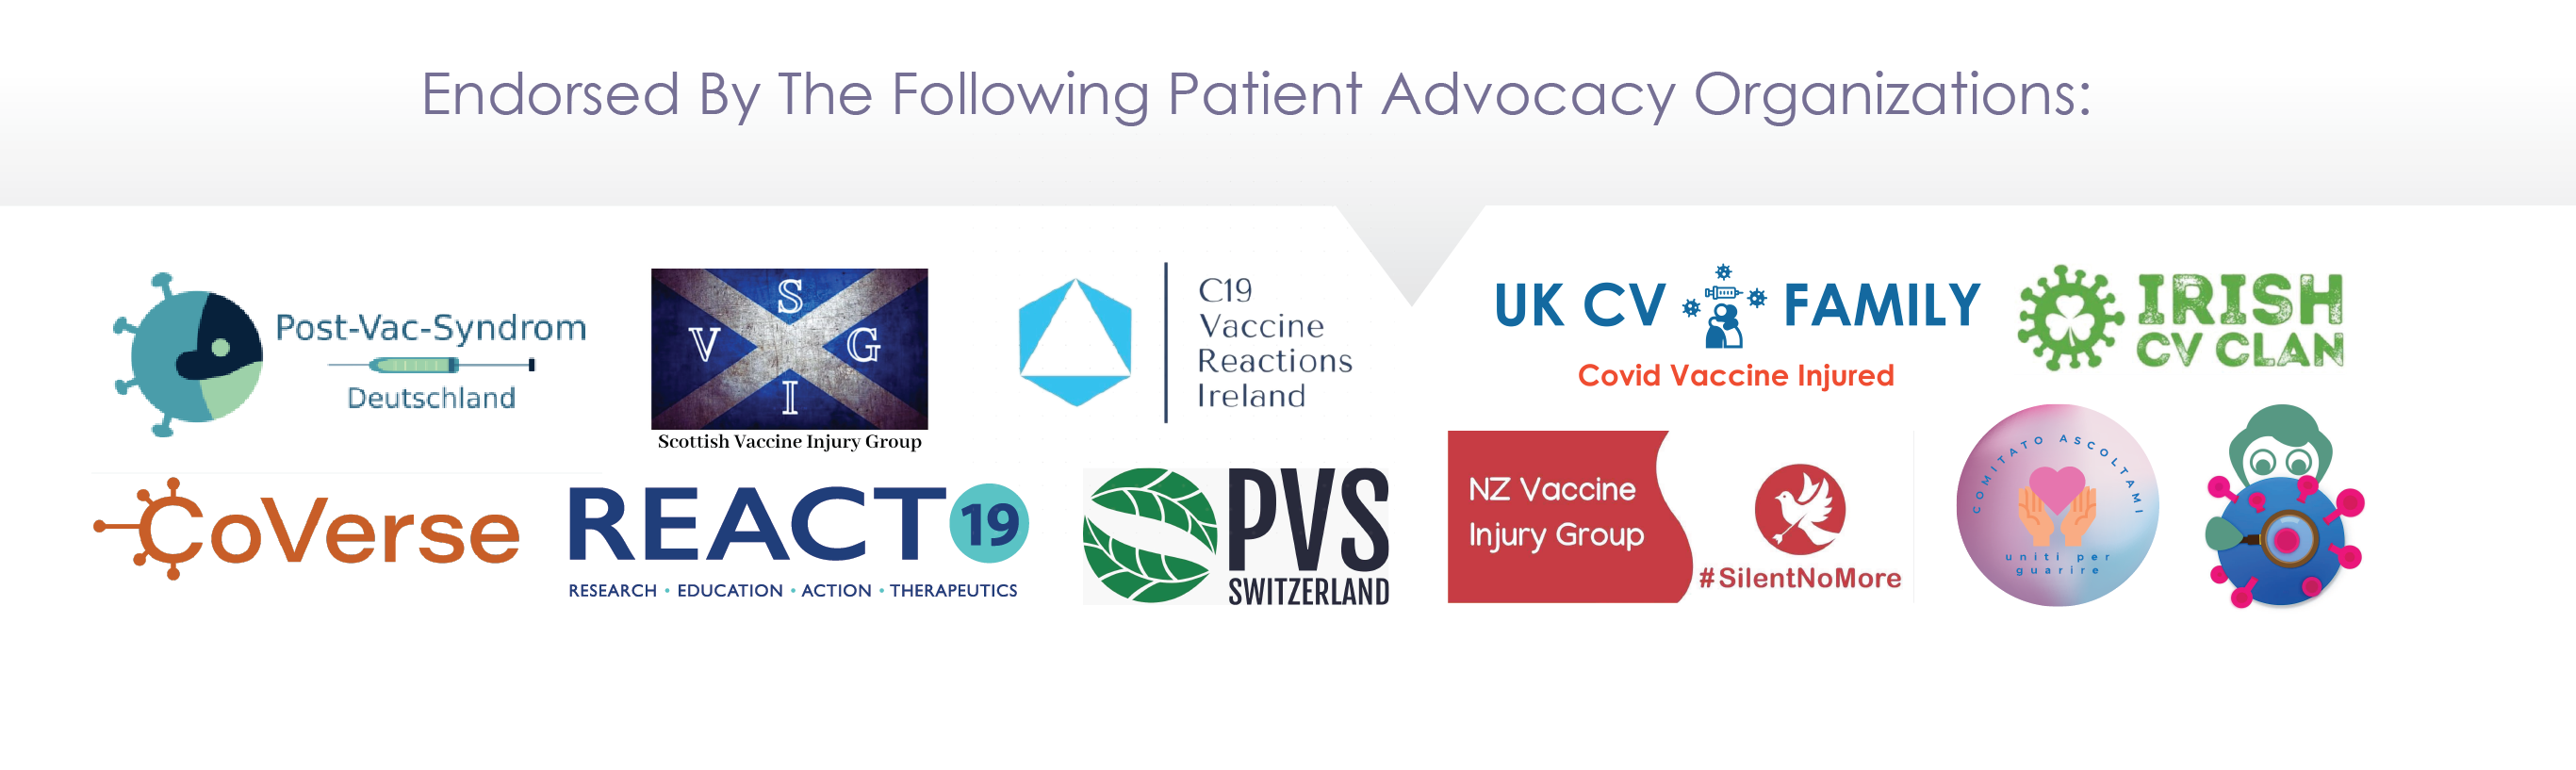 React19 Endorsed by the following Patient Advocacy Organizations. 